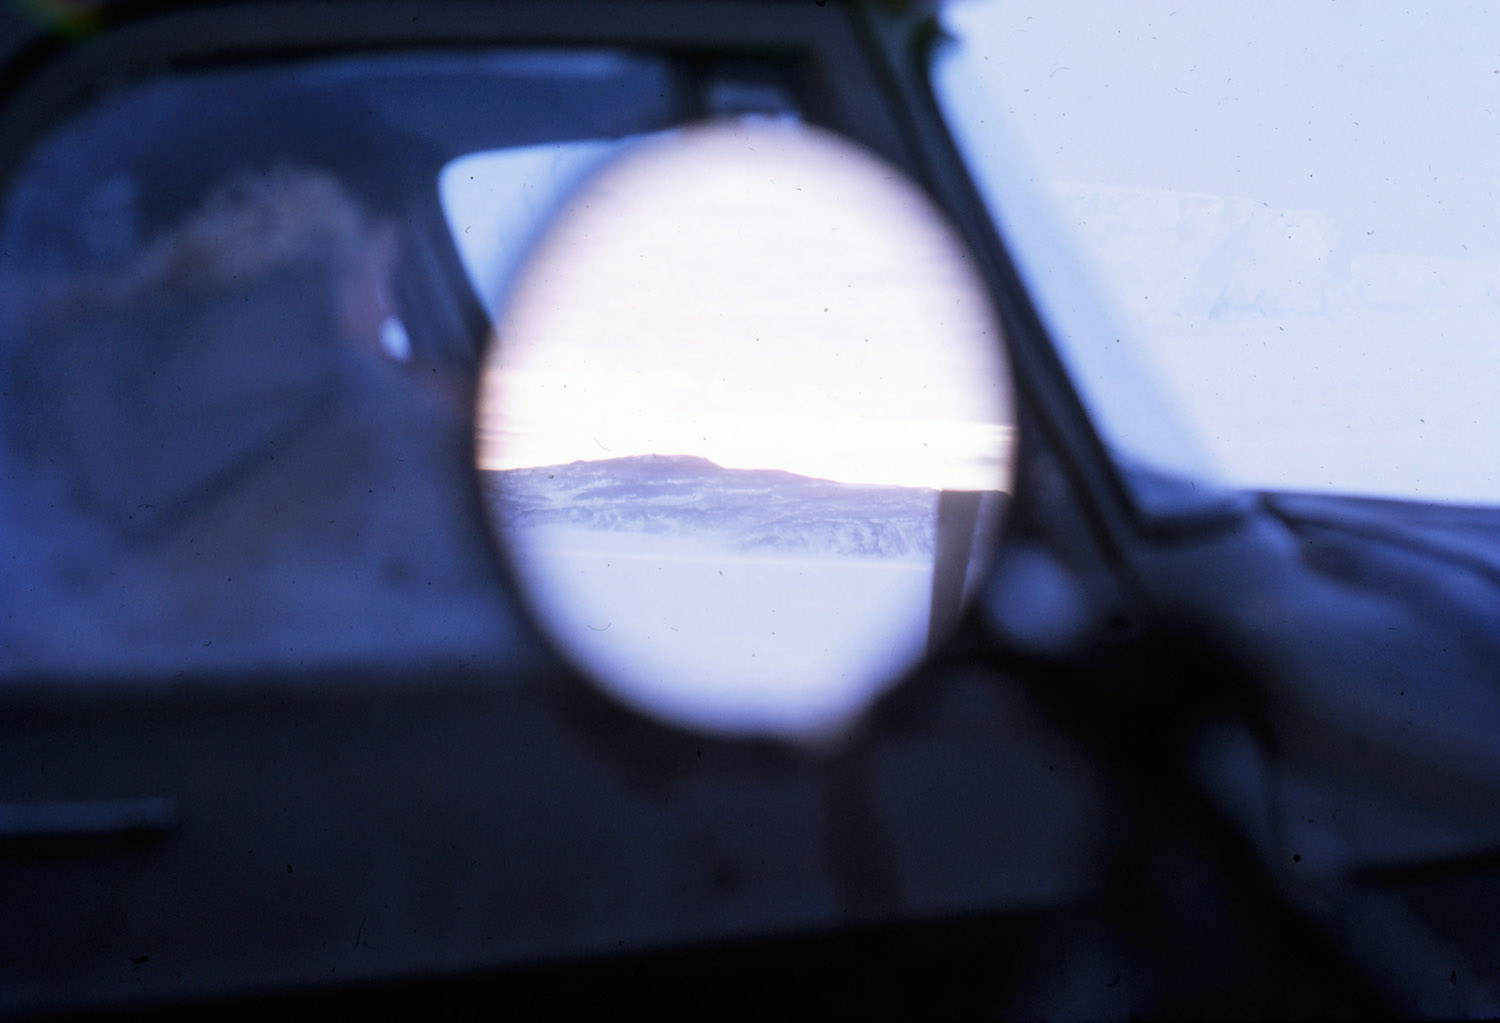 Landscape in a Vehicle Mirror